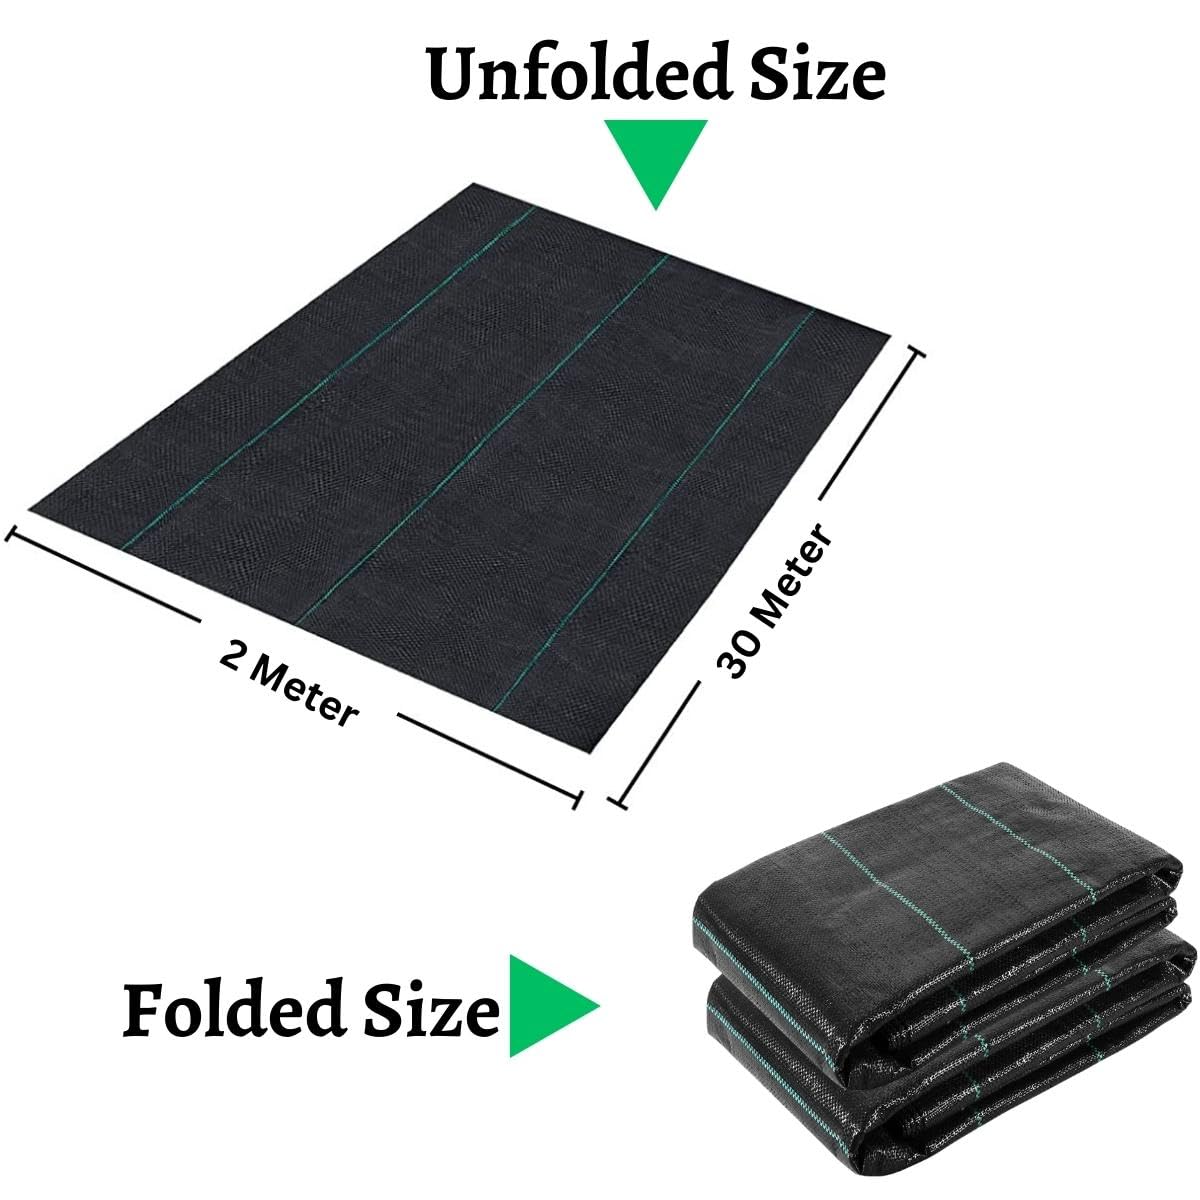 Singhal Premium Garden Weed Control Barrier Sheet Mat 2 Meter x 30 Meter, Landscape Fabric 110 GSM Heavy Duty Weed Block Gardening Mat for Gardens, Agriculture, Outdoor Projects (Black)